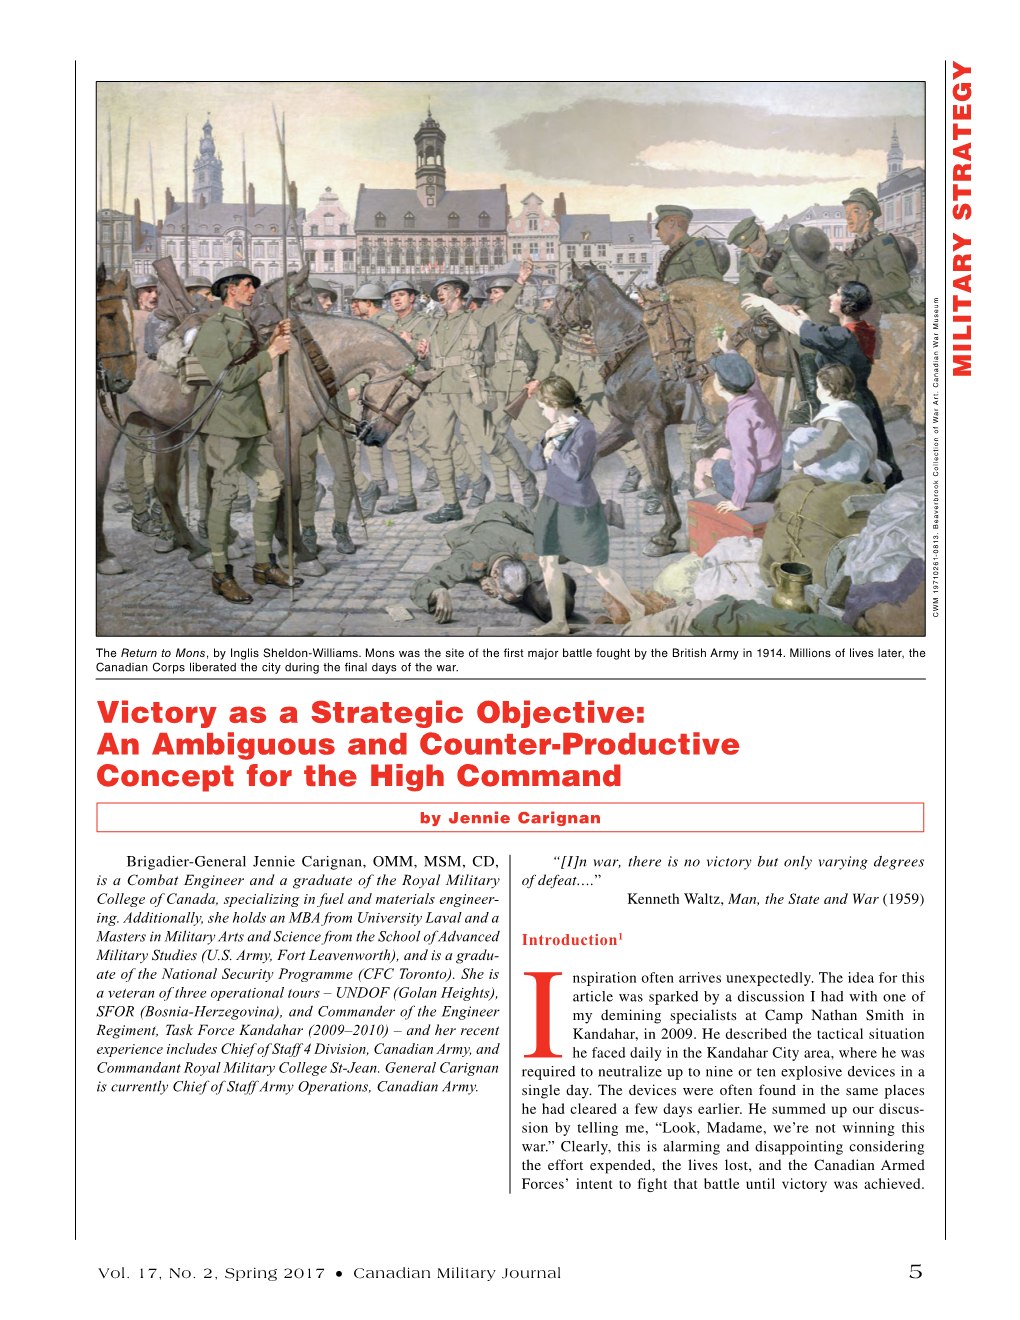 Victory As a Strategic Objective: an Ambiguous and Counter-Productive Concept for the High Command